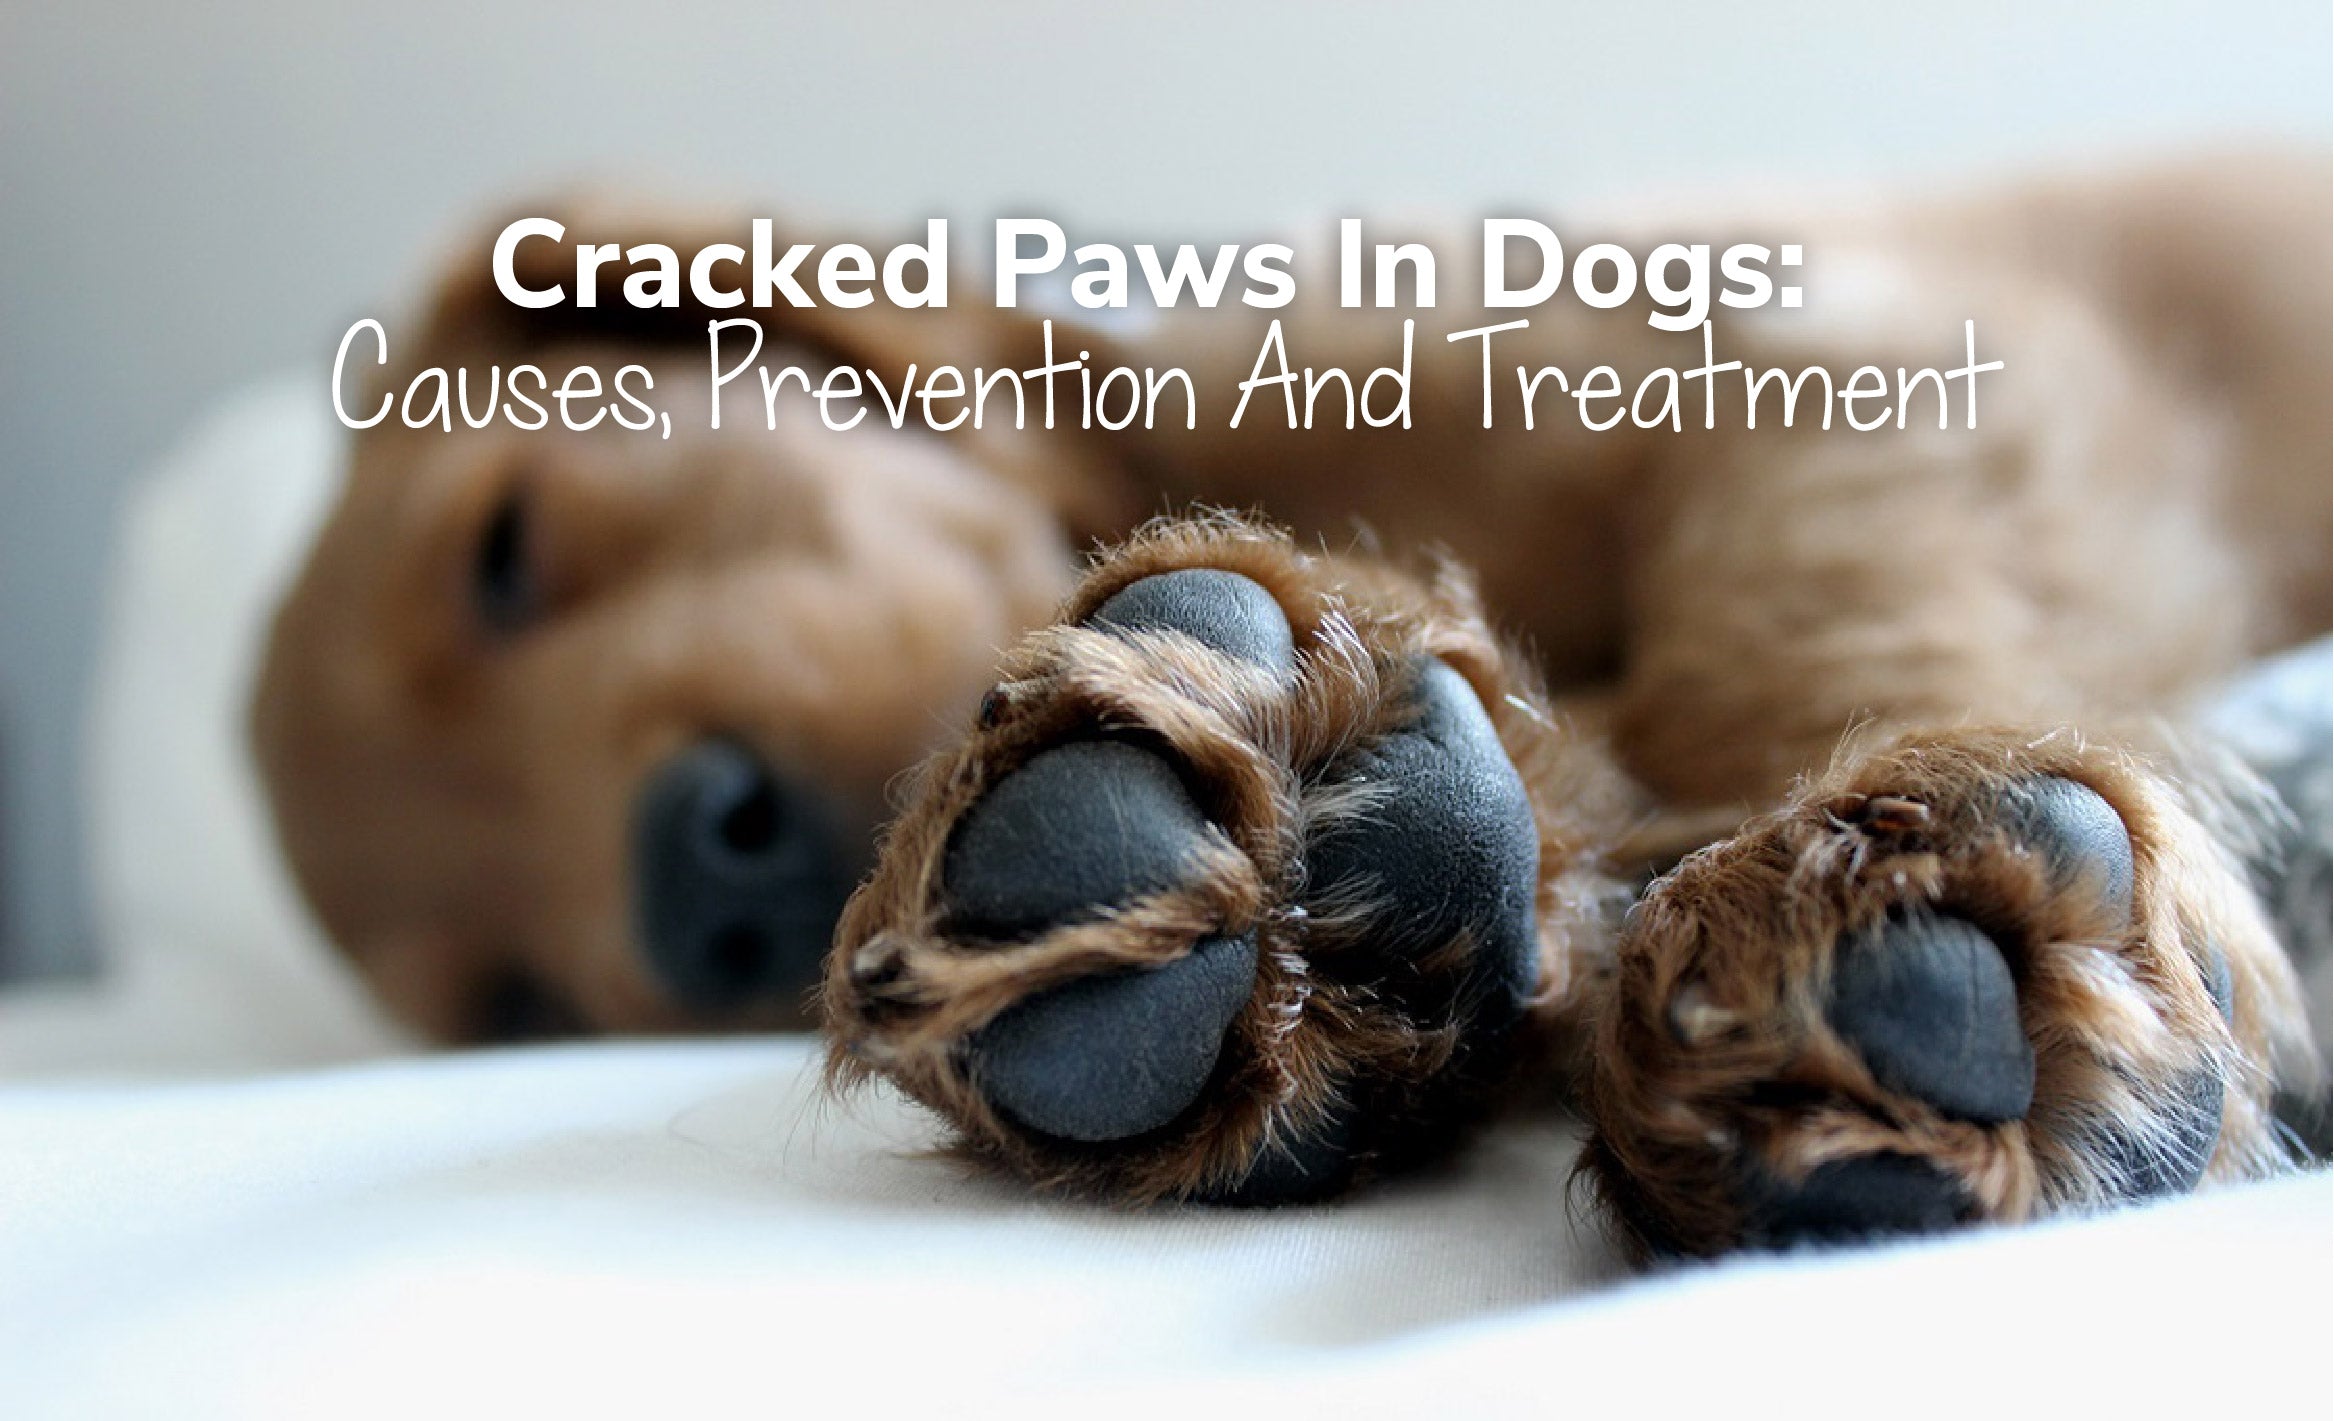 Cracked Dog Paws: Tips and Treatments